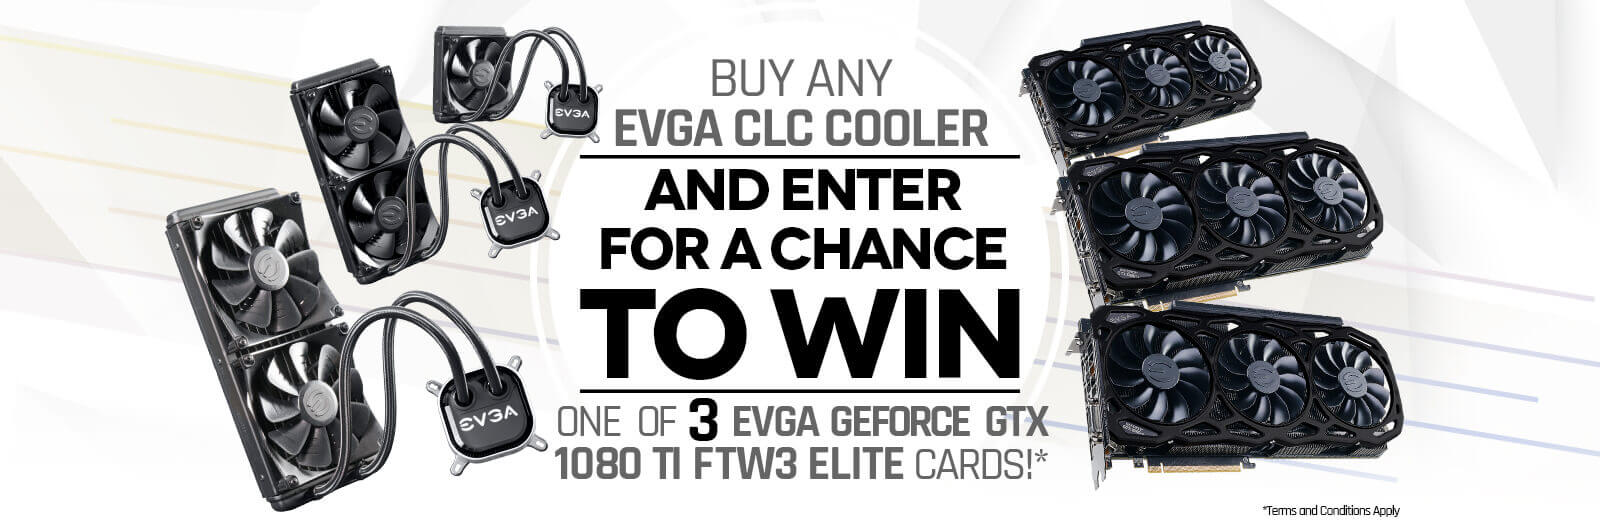 Buy EVGA CLC Enter To Win One Of 3 EVGA GeForce GTX 1080 Ti FTW3 Graphics Cards